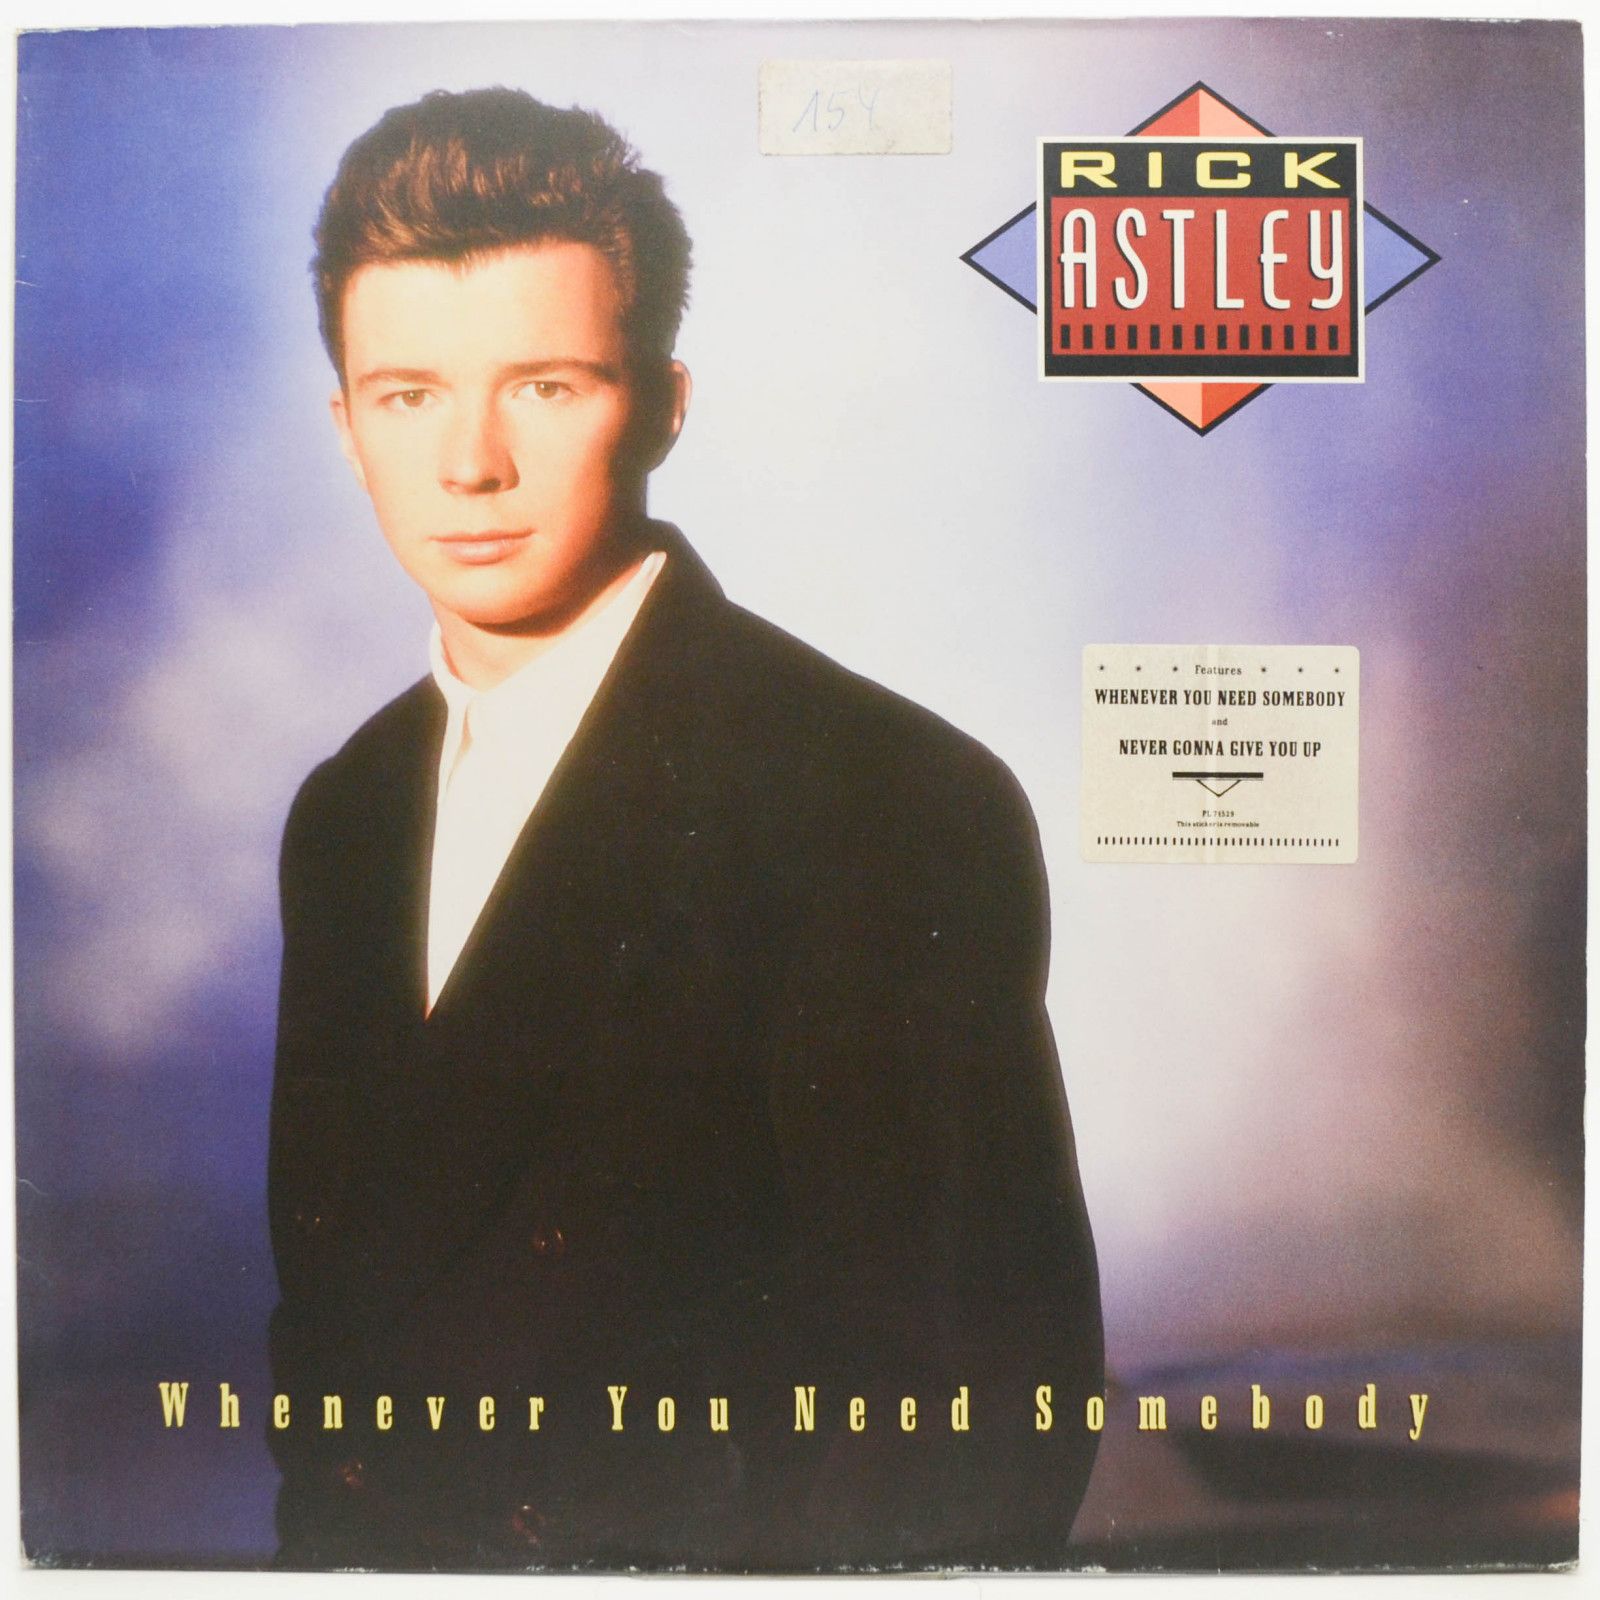 Rick Astley — Whenever You Need Somebody, 1987